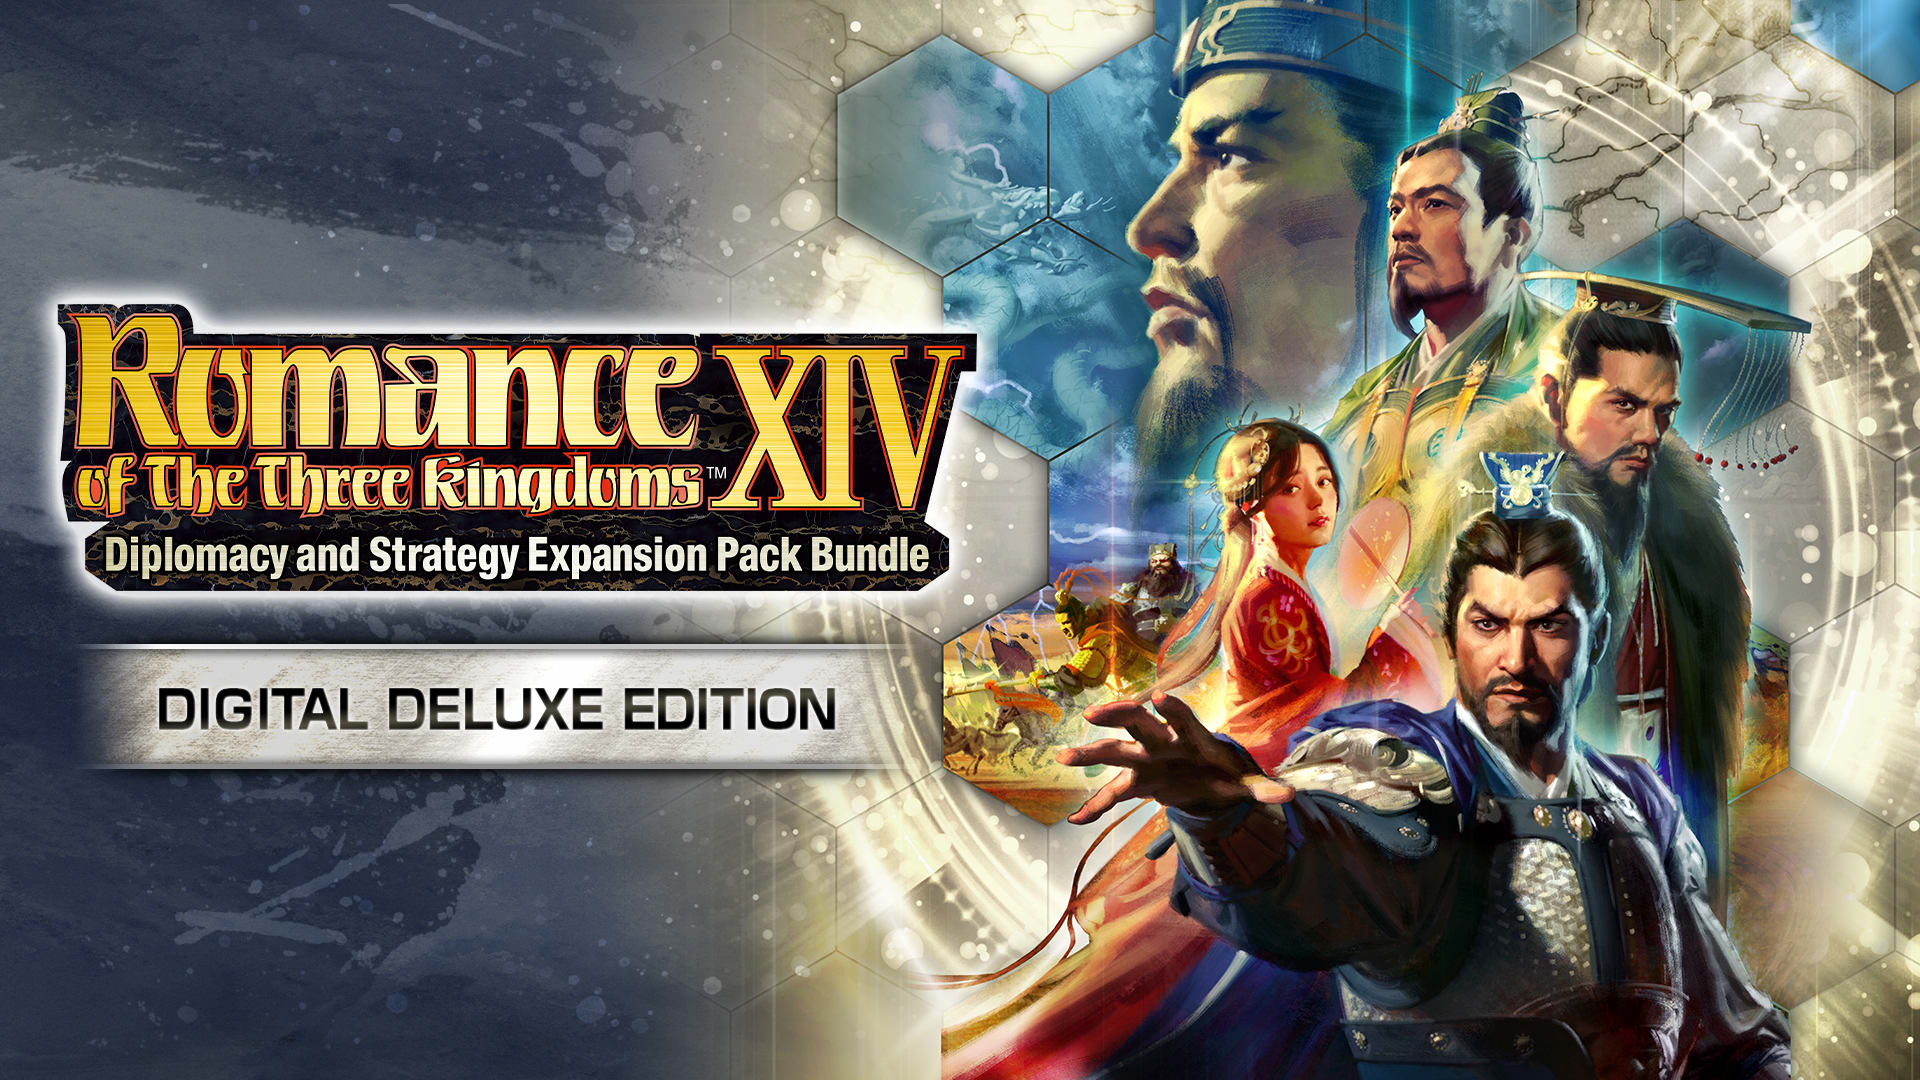 ROMANCE OF THE THREE KINGDOMS XIV: Diplomacy and Strategy Expansion Pack Bundle Digital Deluxe Edition